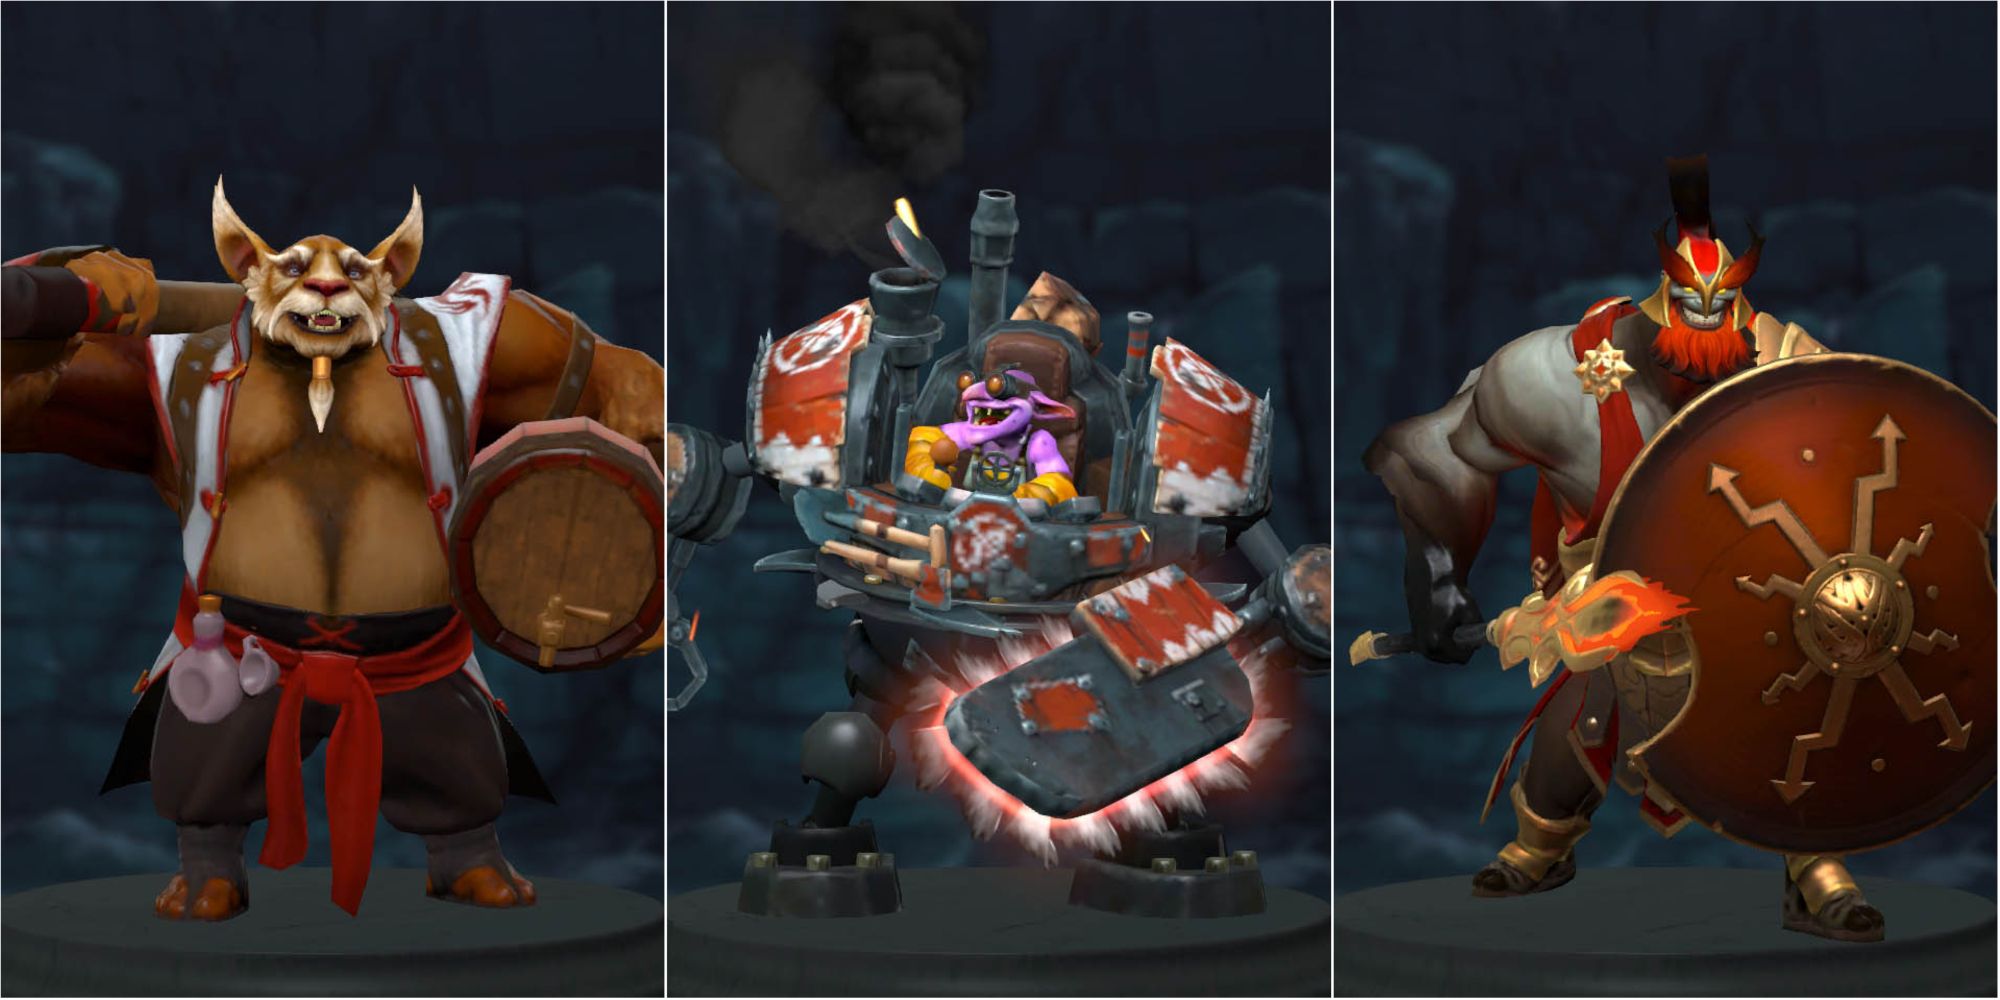 Dota 2 collage featuring brewmaster, timbersaw, and mars